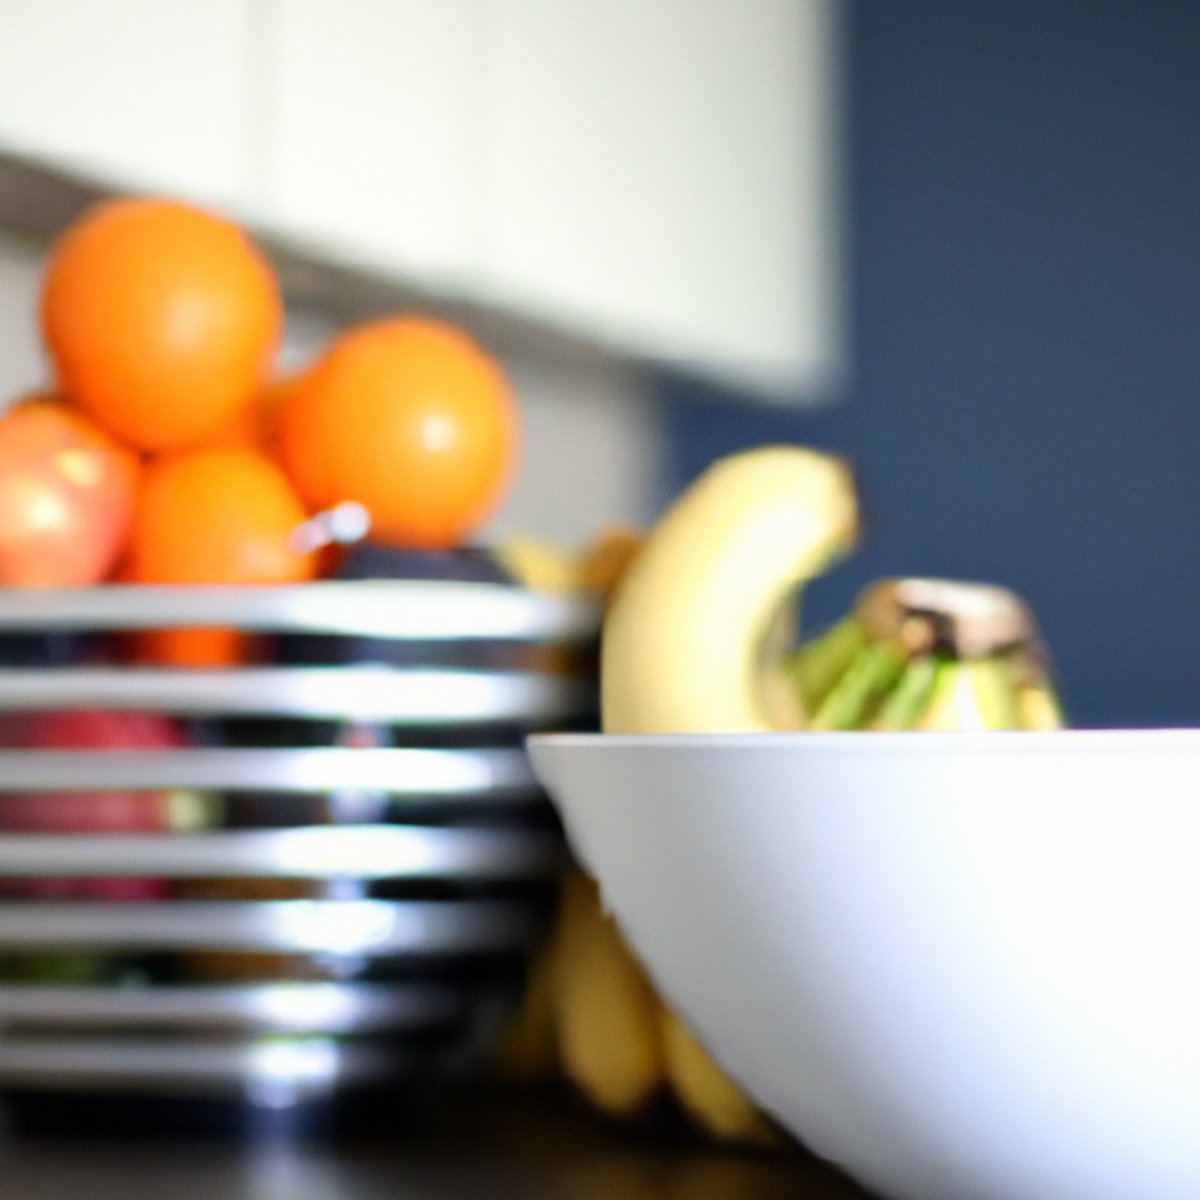 Organized kitchen with utensils, cutting board, and fruits. Sunlight creates a comforting ambiance, emphasizing the importance of a well-equipped kitchen for managing Alkaptonuria.